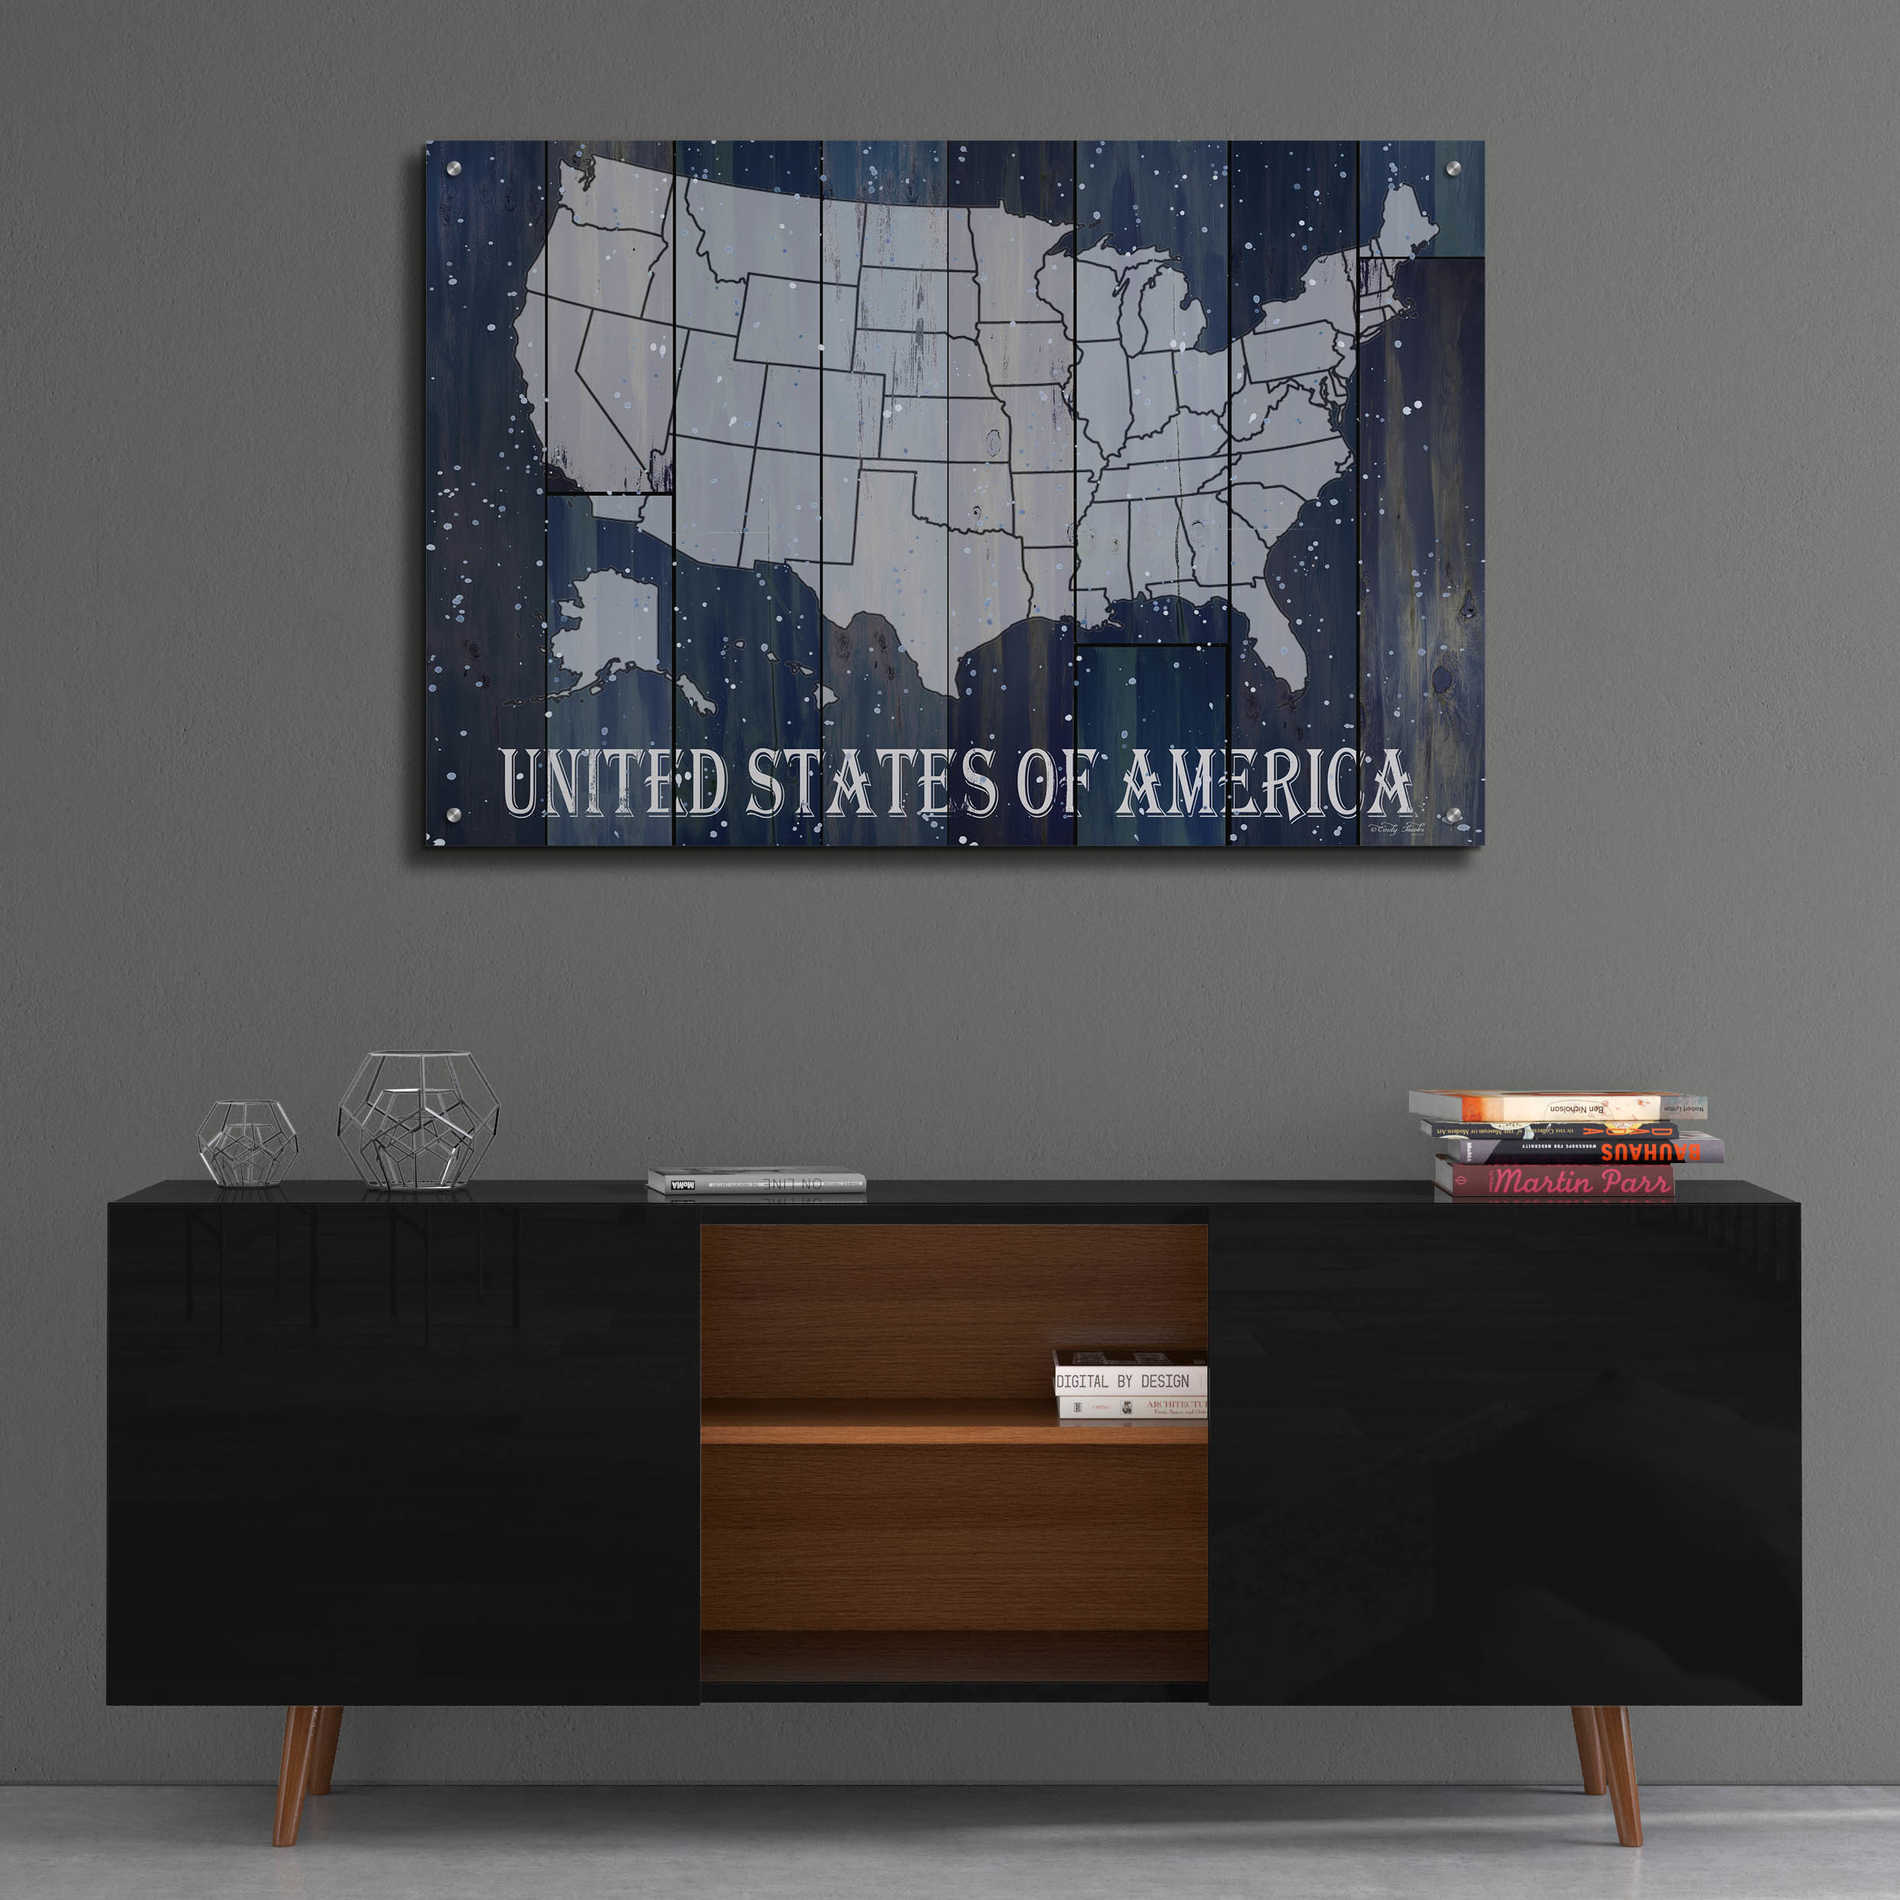 Epic Art 'Navy United States of America' by Cindy Jacobs, Acrylic Glass Wall Art,36x24